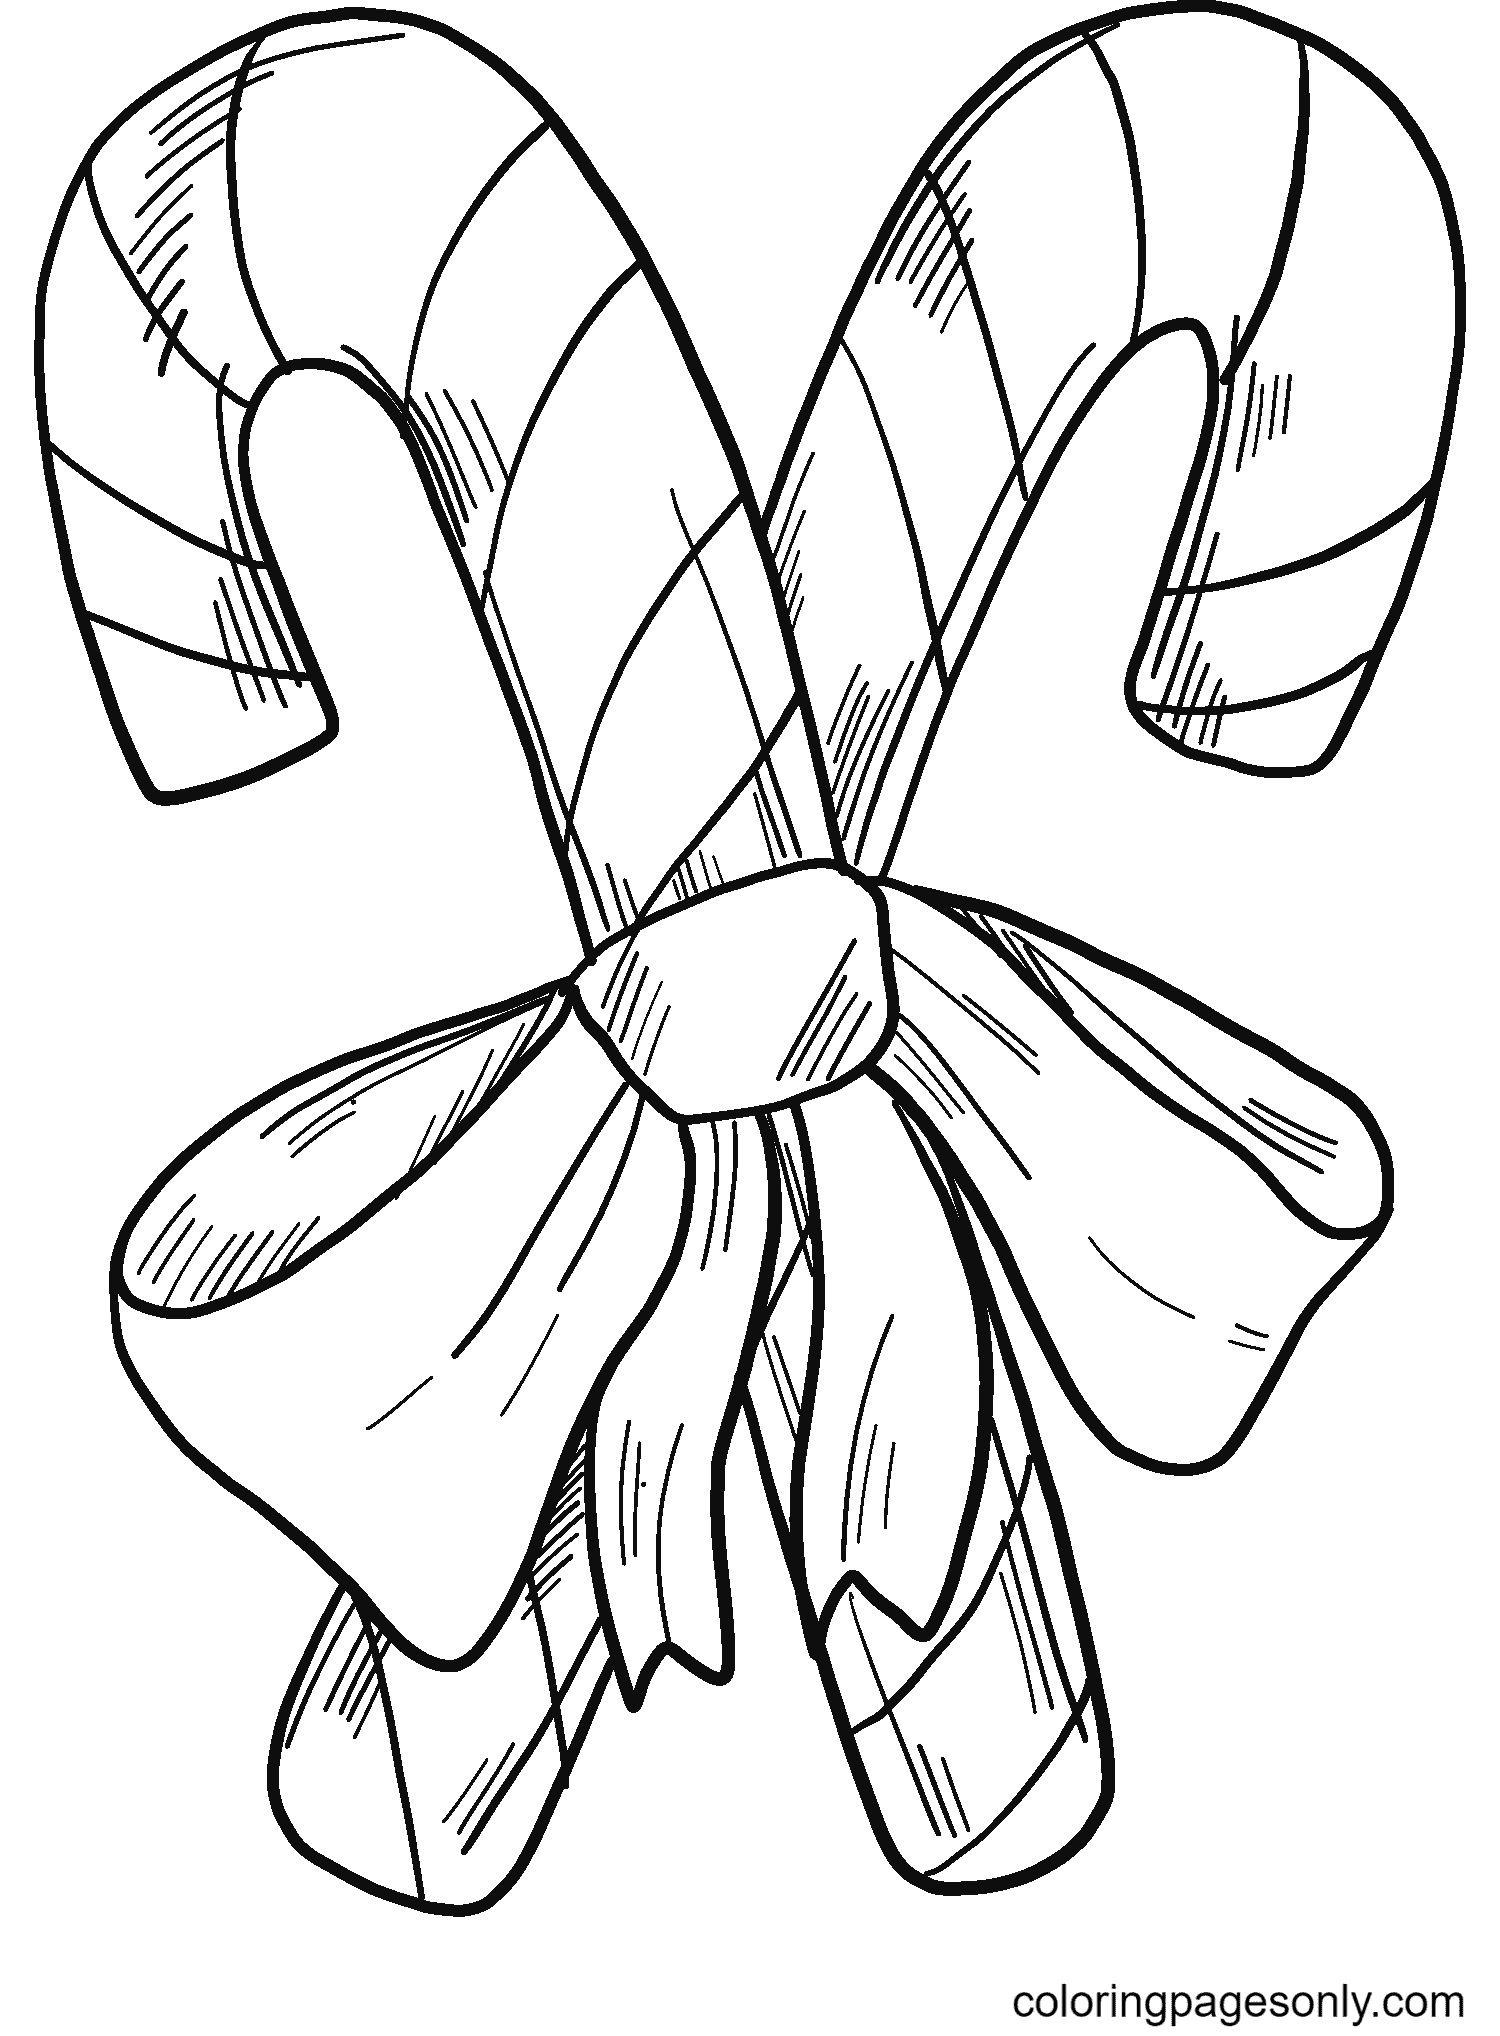 Candy Canes Free Coloring Page